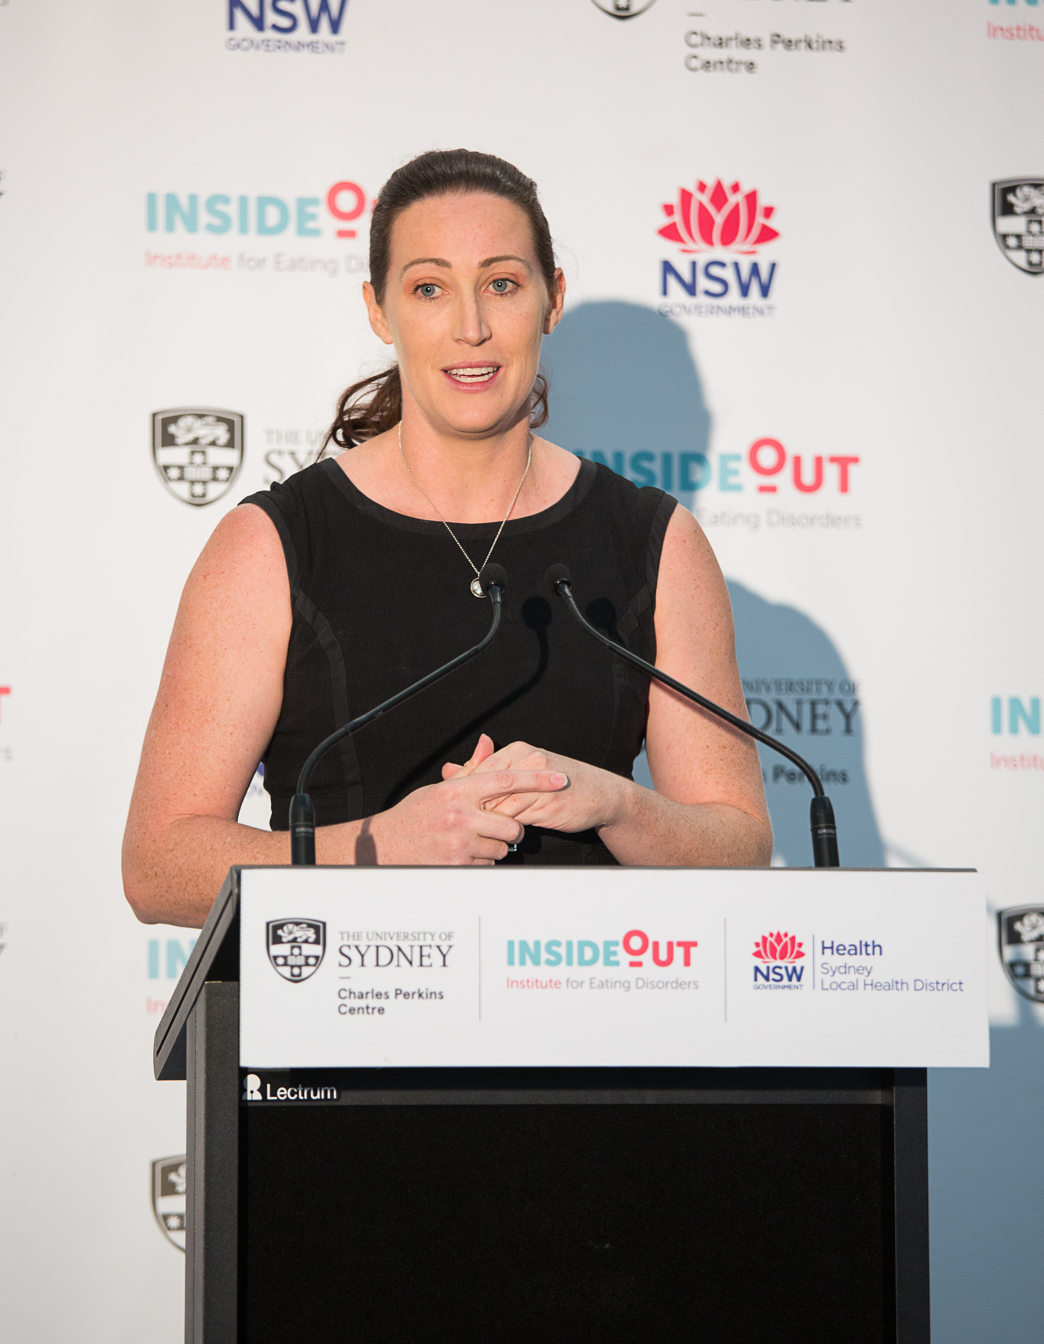 Olympic hurdler and InsideOut Institute ambassador Jana Pittman at the launch of the InsideOut Institute